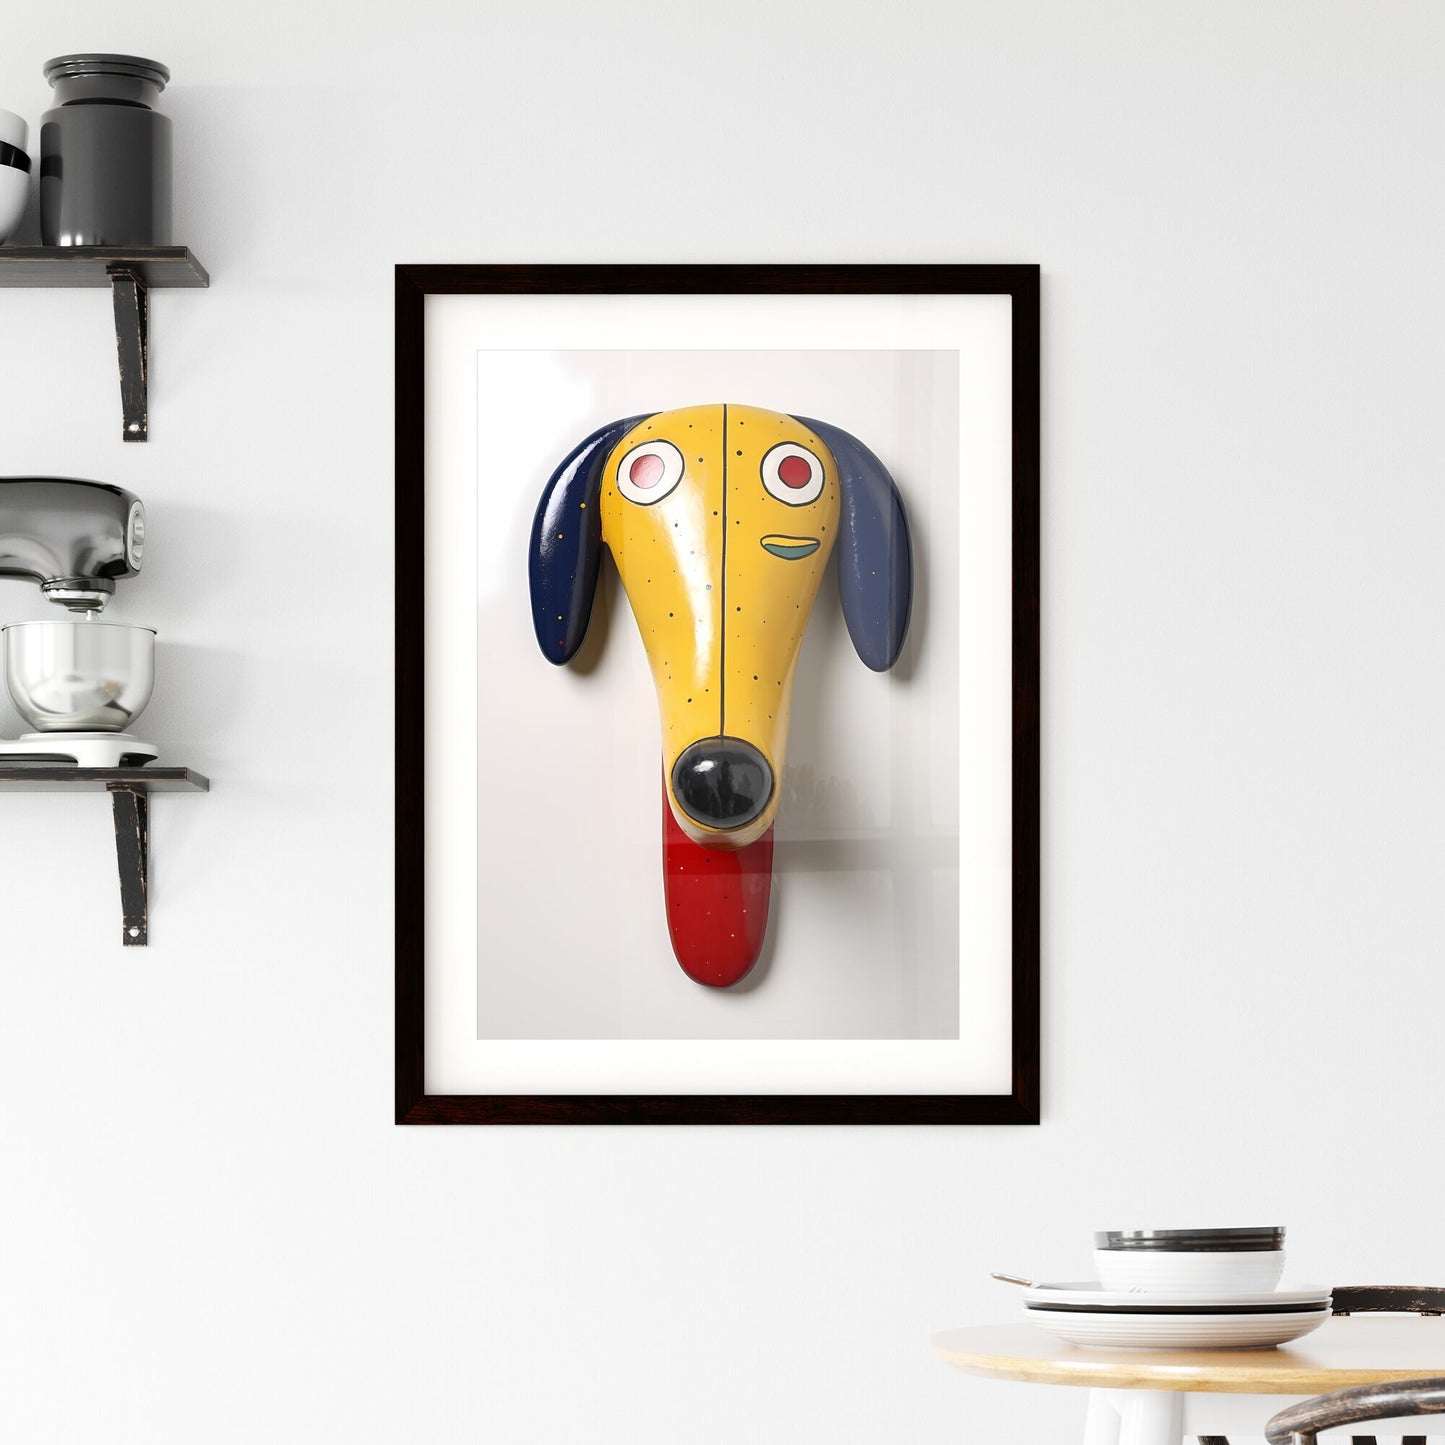 A Poster of minimalist dog art - A Yellow And Blue Dog Head Default Title